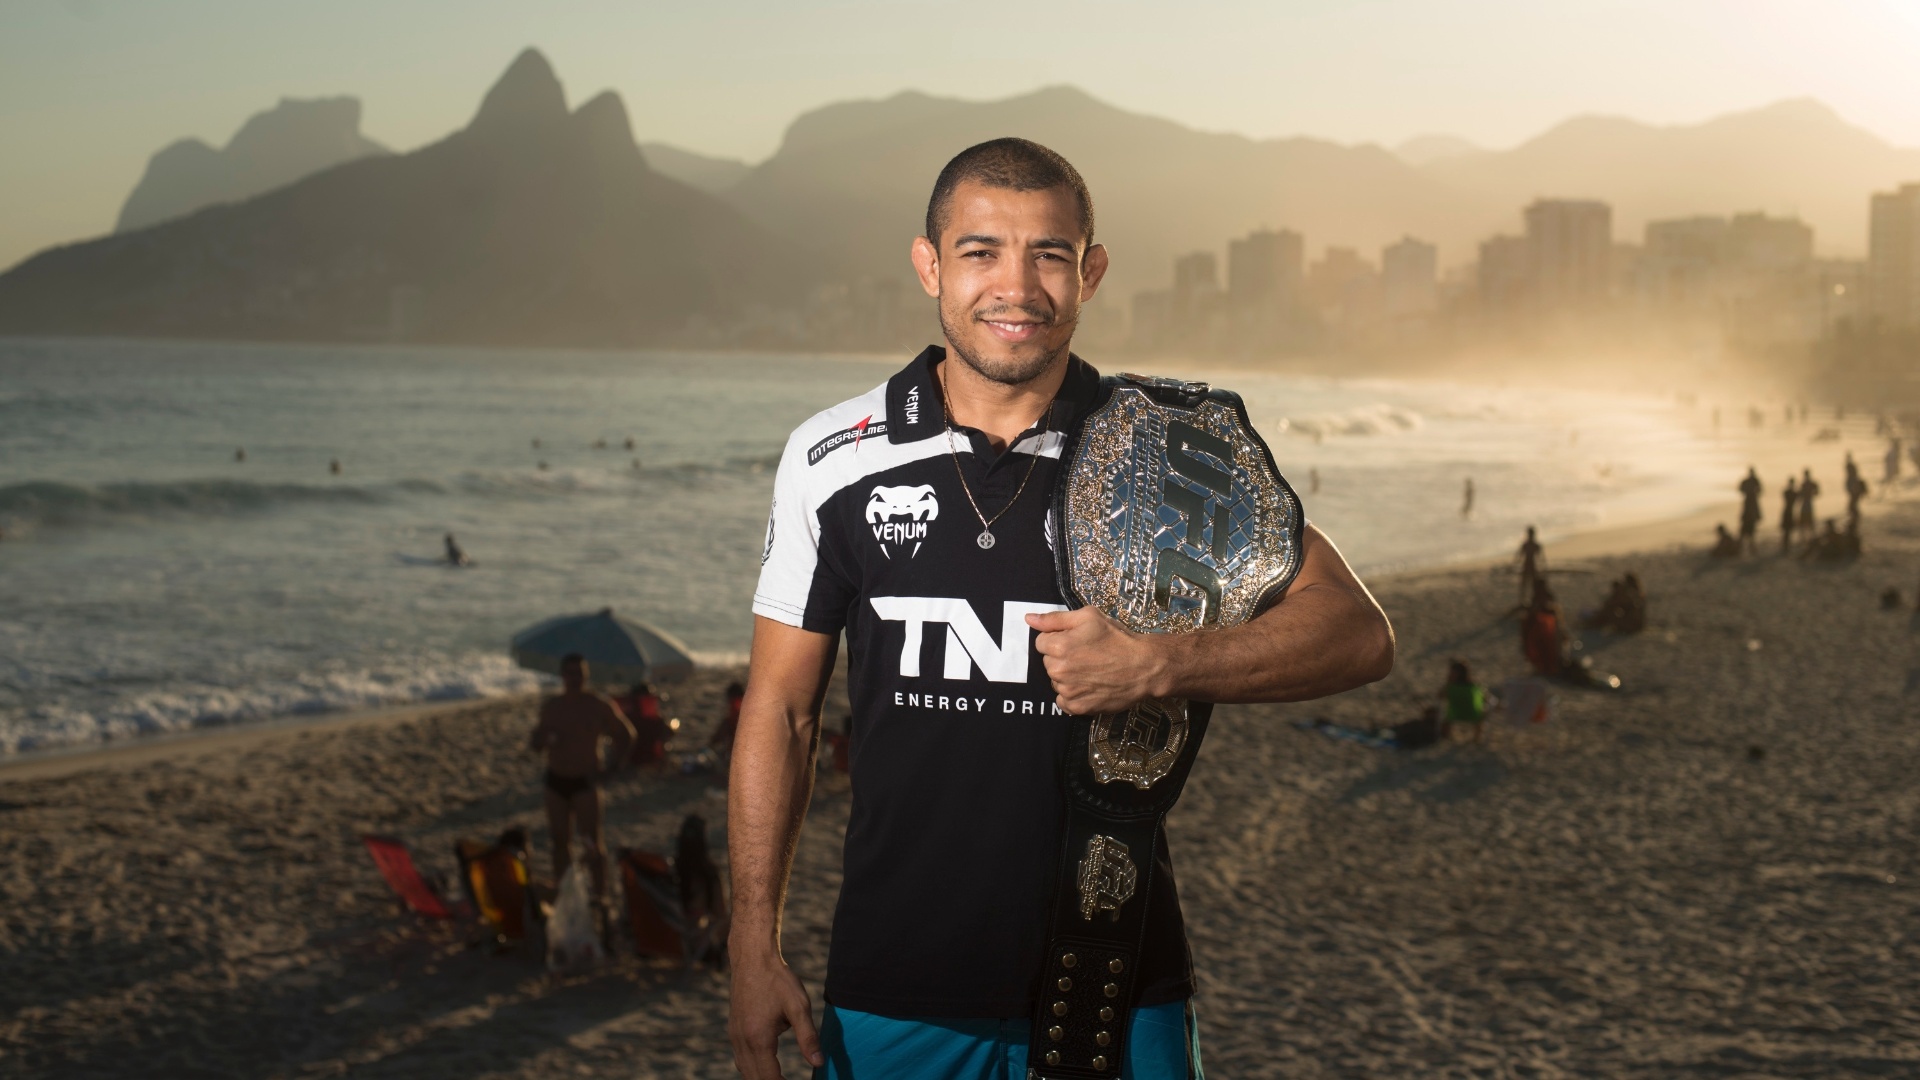 Fearless Jose Aldo wallpapers and images - wallpapers, pictures ...